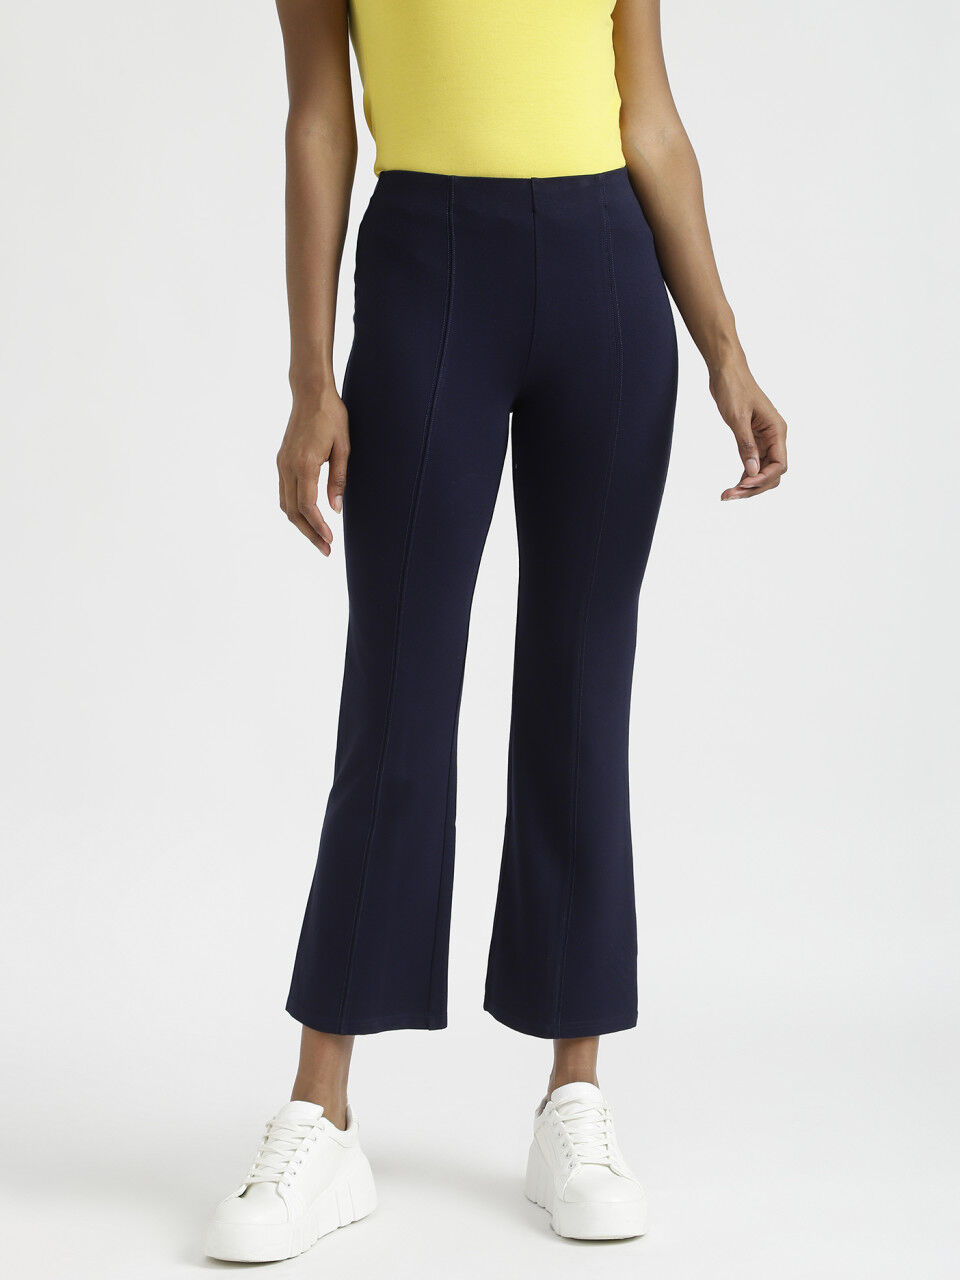 Mid Rise Ankle Length Navy Trouser-Solid